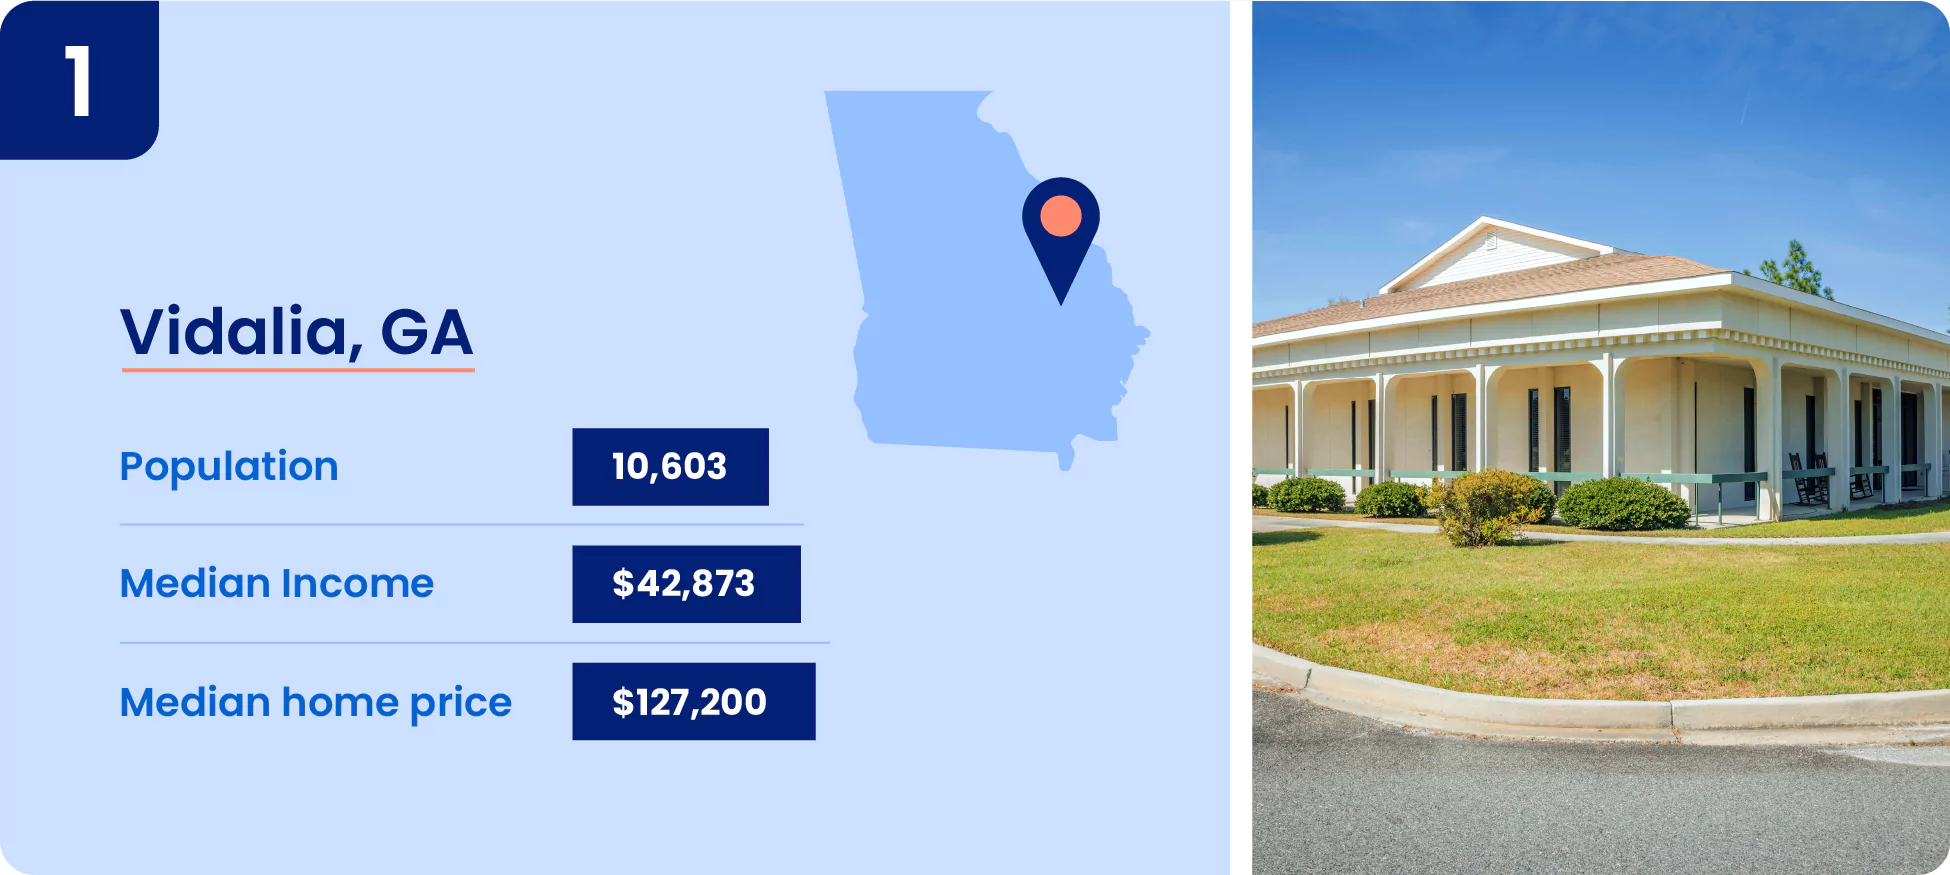 Image shows key information about one of the cheapest place to live in Georgia, the city of Vidalia.